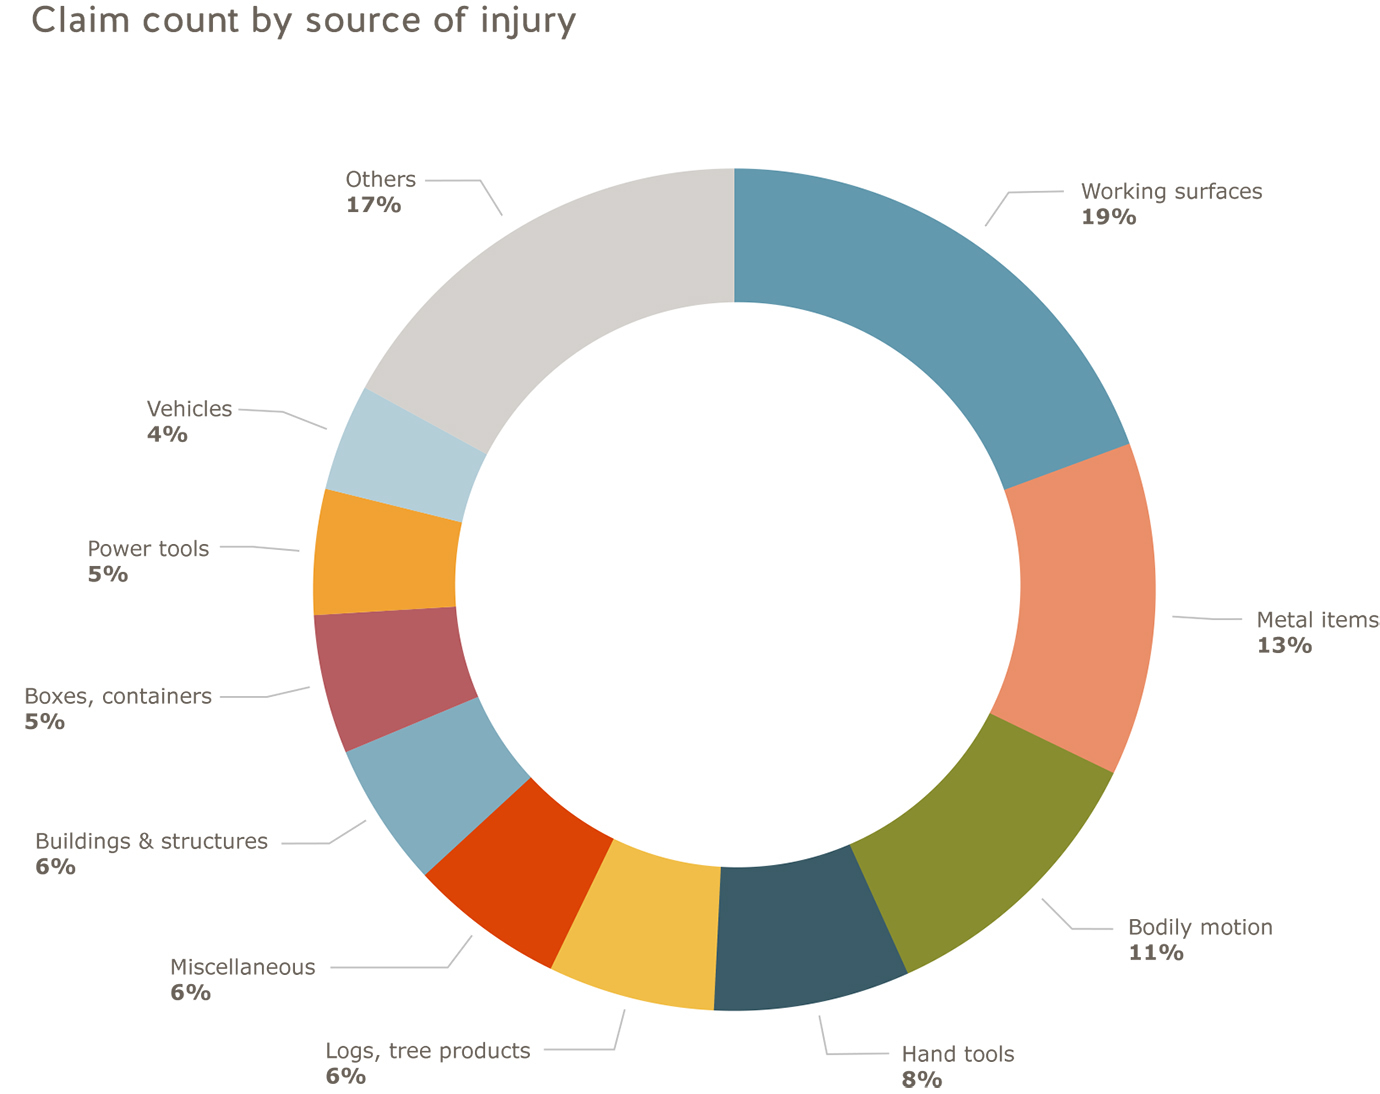 Construction sector claim count by source of injury: working surfaces=19%; metal items=13%; bodily motion=11%; hand tools=8%; logs, tree products=6%; miscellaneous=6%; buildings & structures=6%; boxes,  containers=5%; power tools=5%; vehicles=4%; others=17%